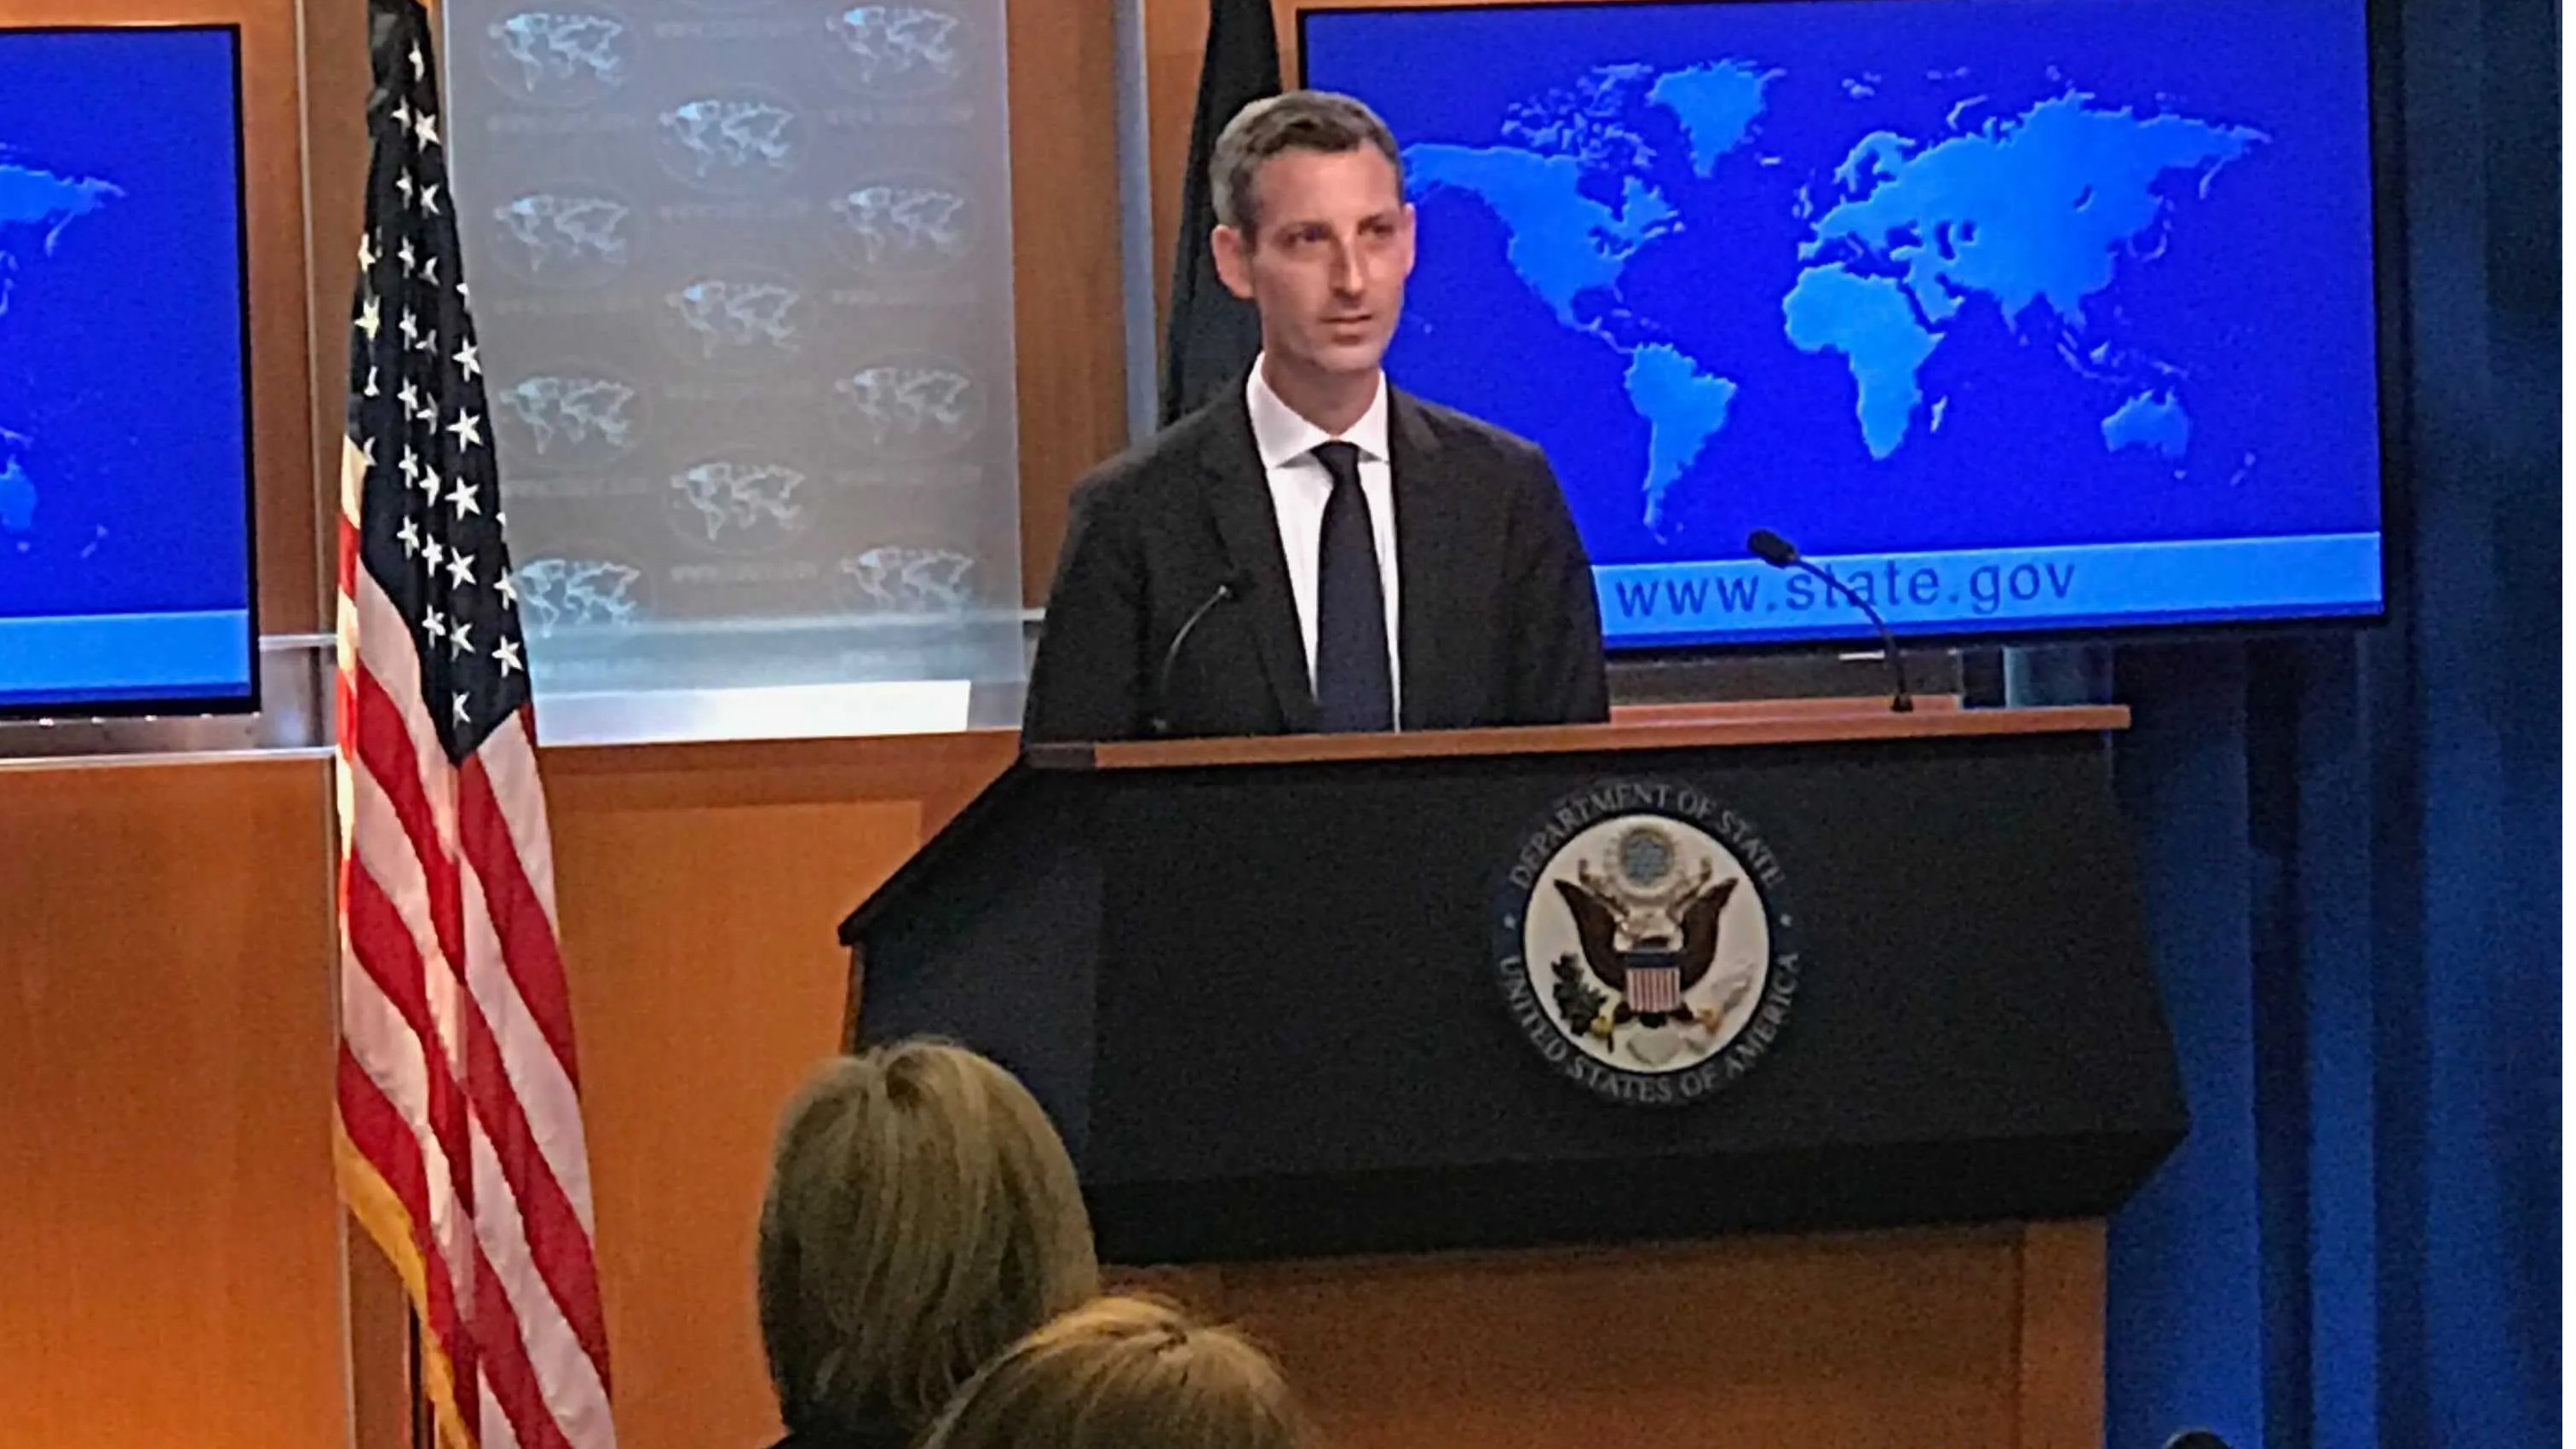 United States condemns violence in Myanmar against protesters, says Ned Price